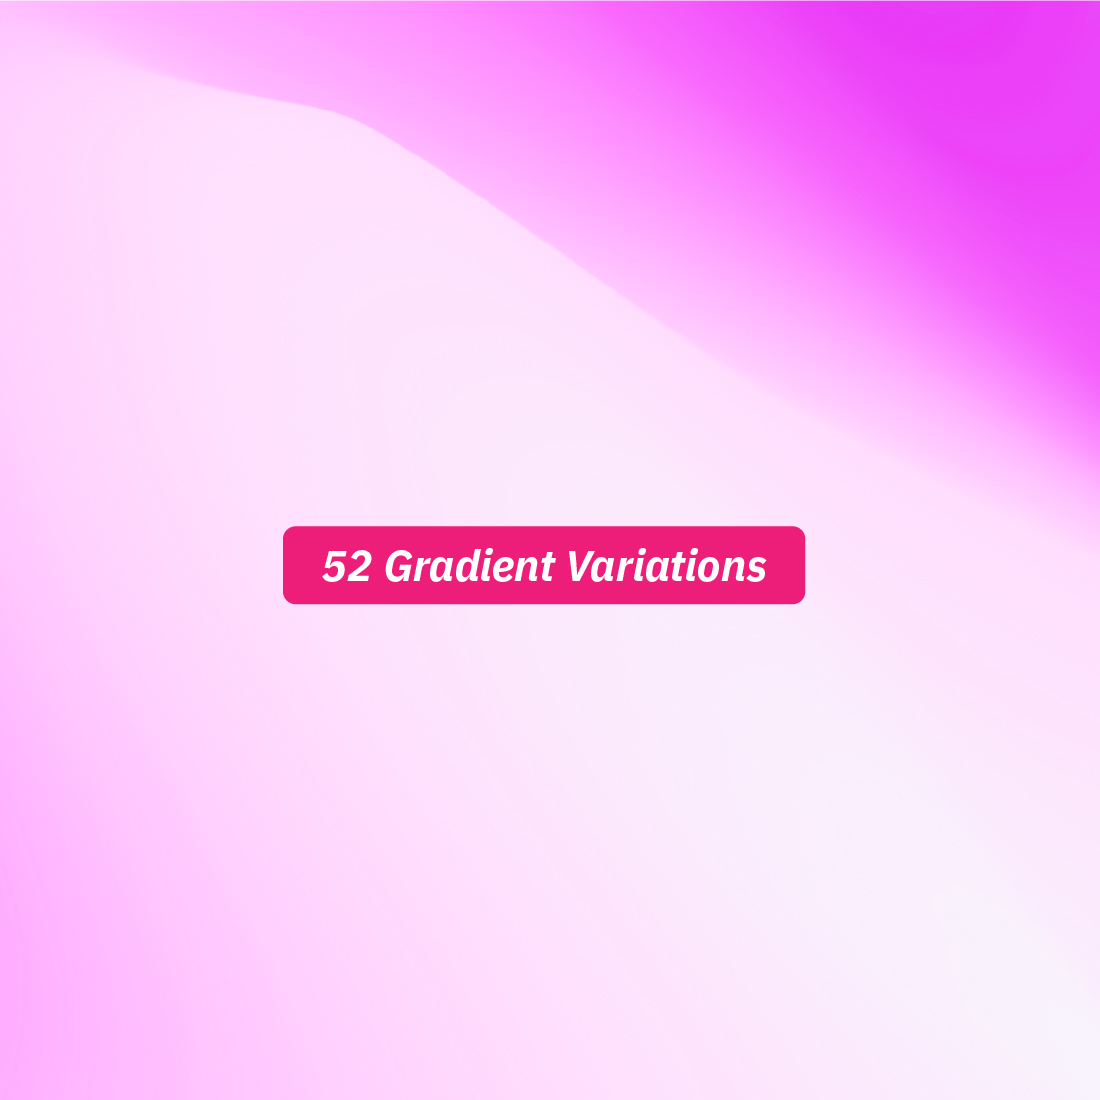 Soothing Gradient | Gradient Color - abstract images with colorful gradient backgrounds preview image.